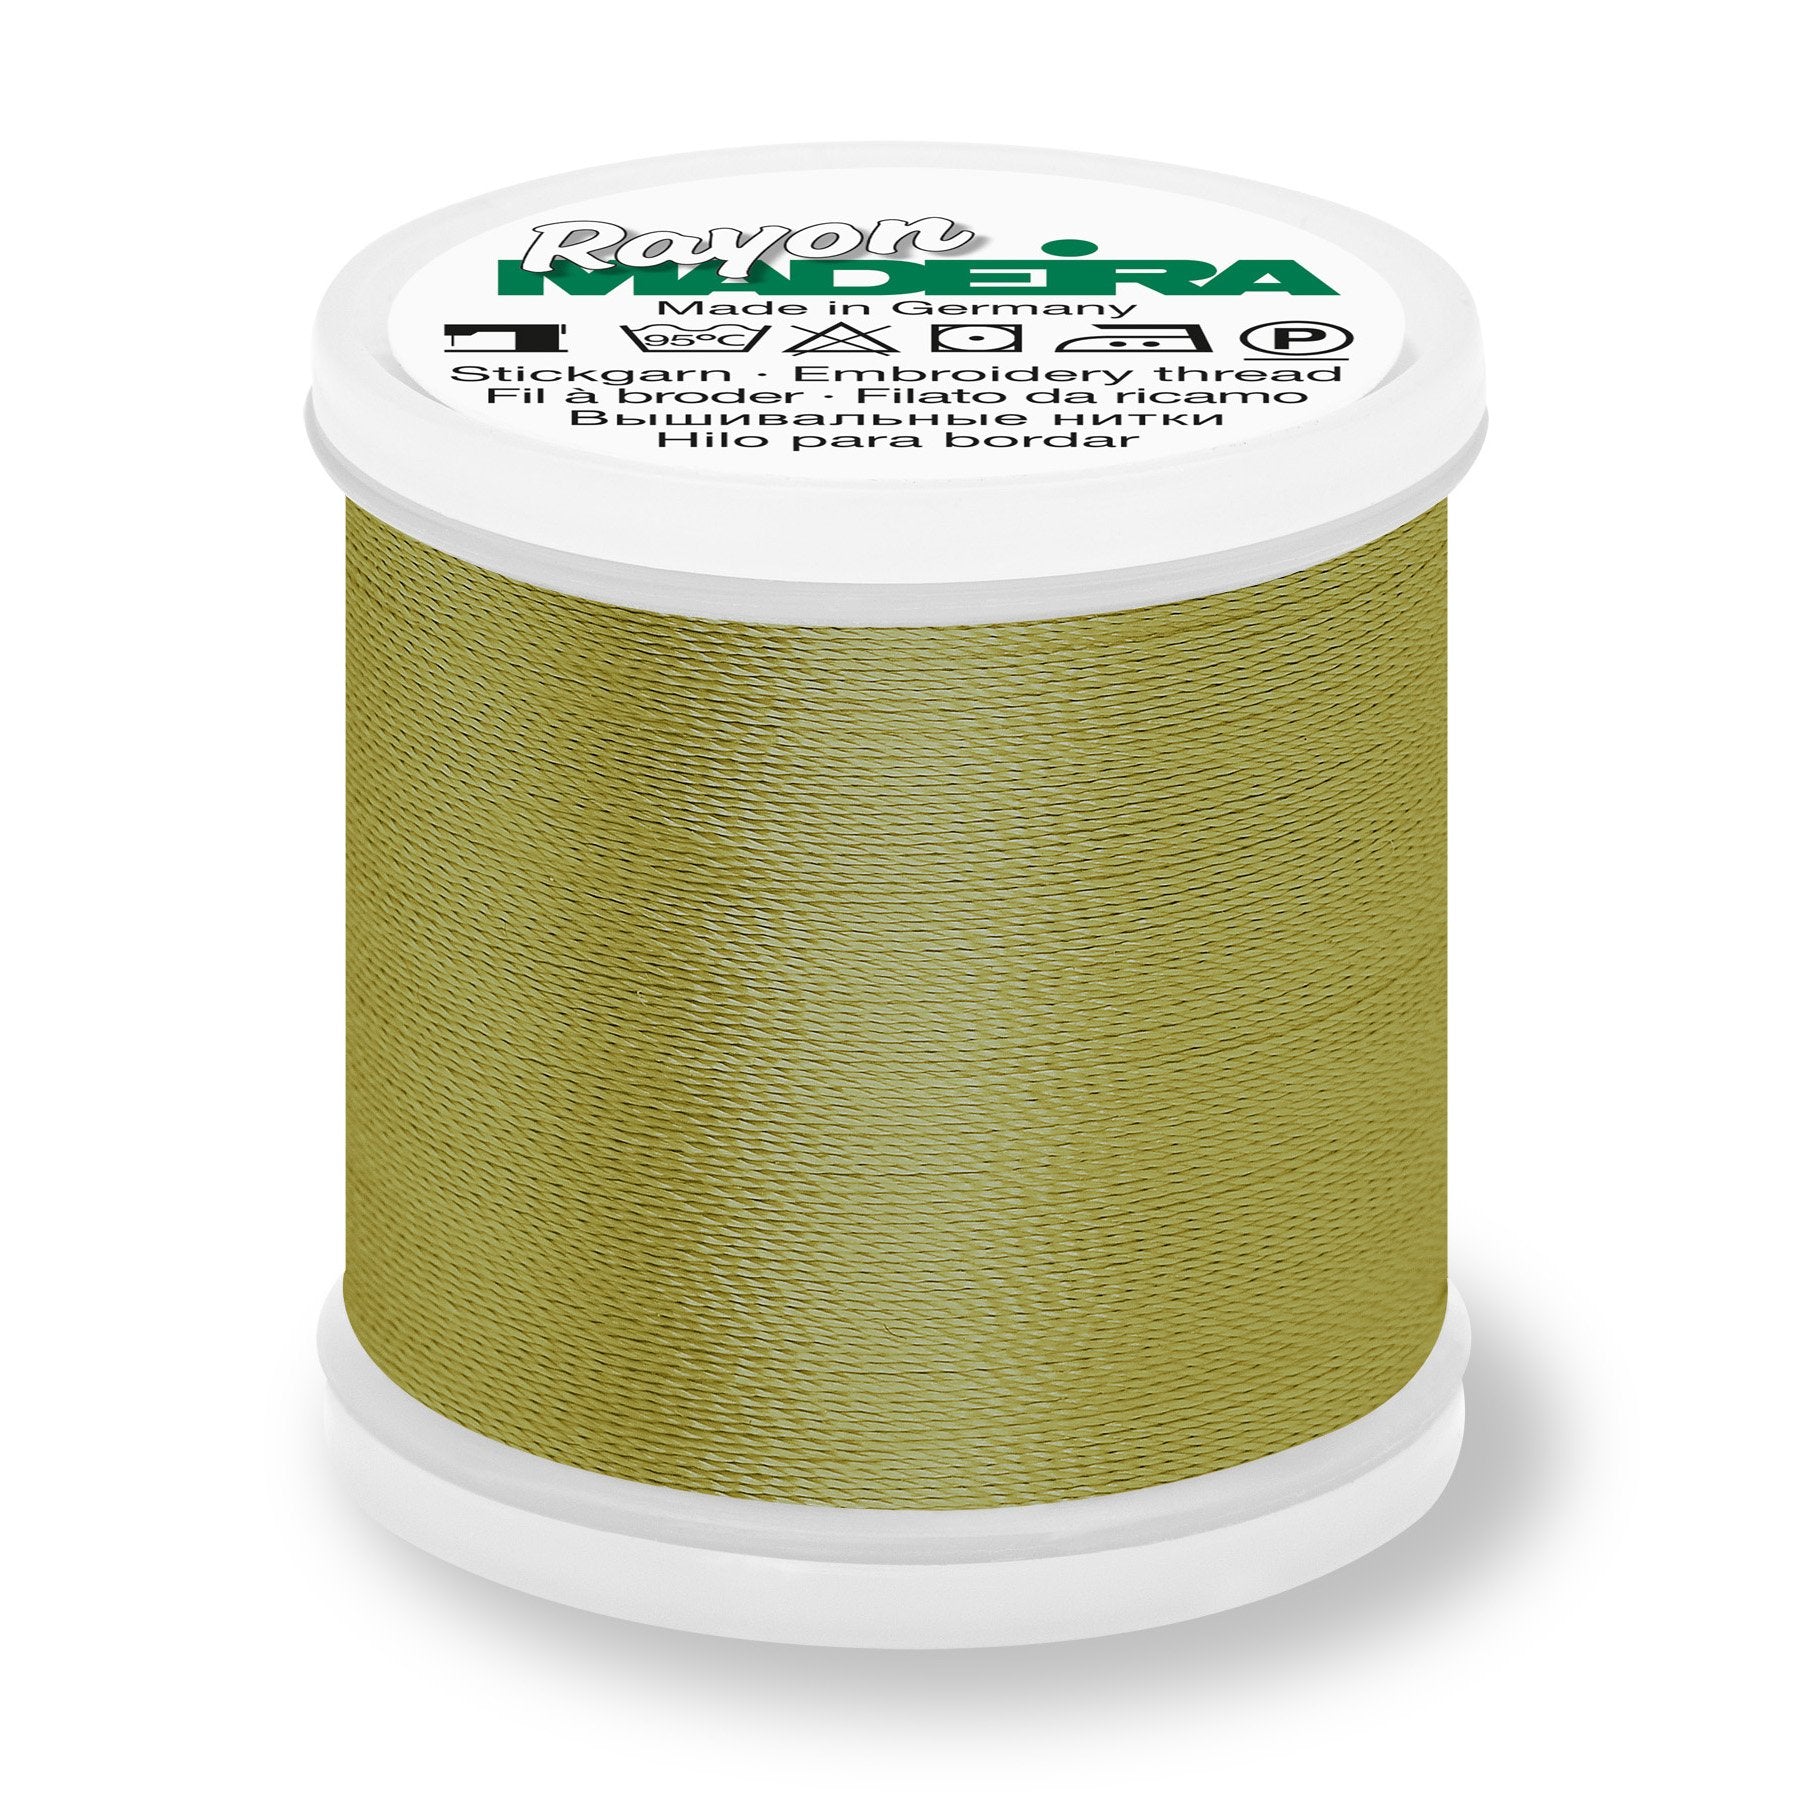 Madeira Rayon 40 Embroidery Thread 200m #1190 Gold Green from Jaycotts Sewing Supplies